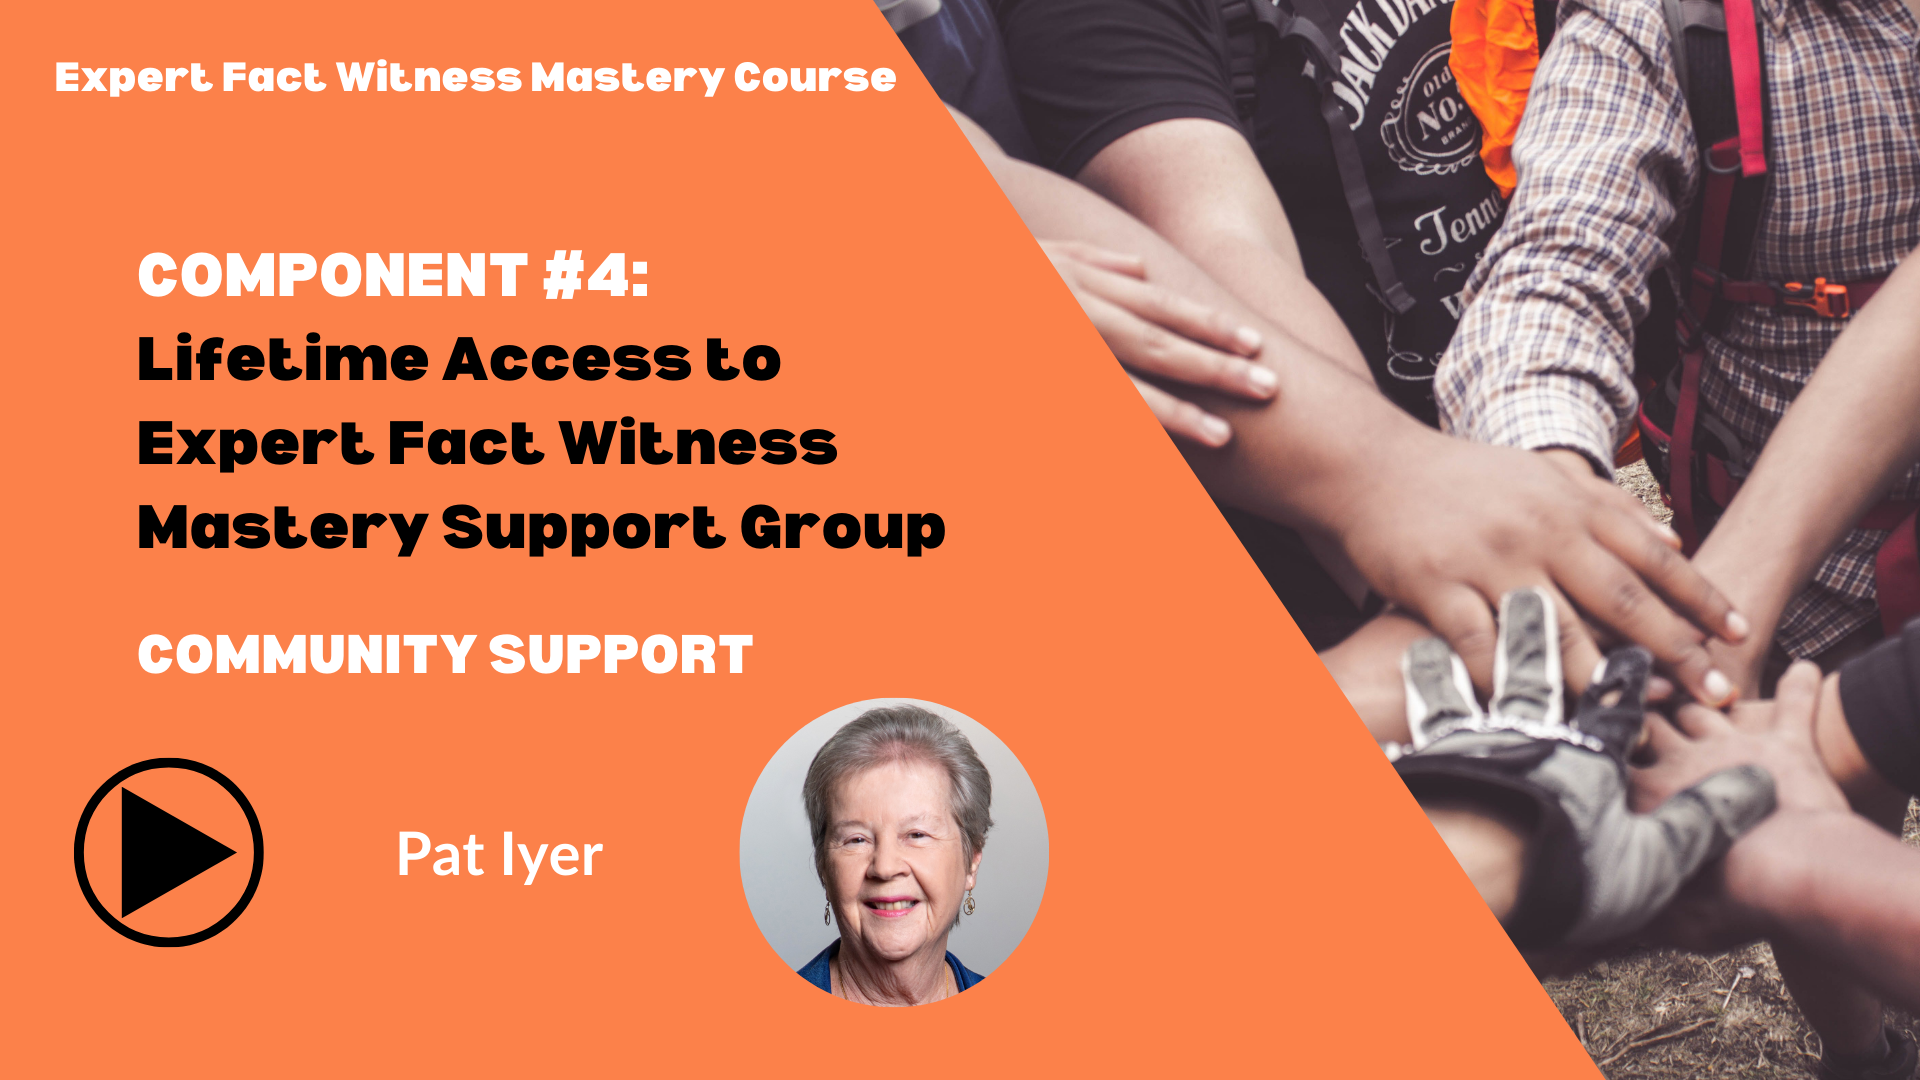 Pat Iyer - C4 Expert Fact Witness Mastery Course - Community Support